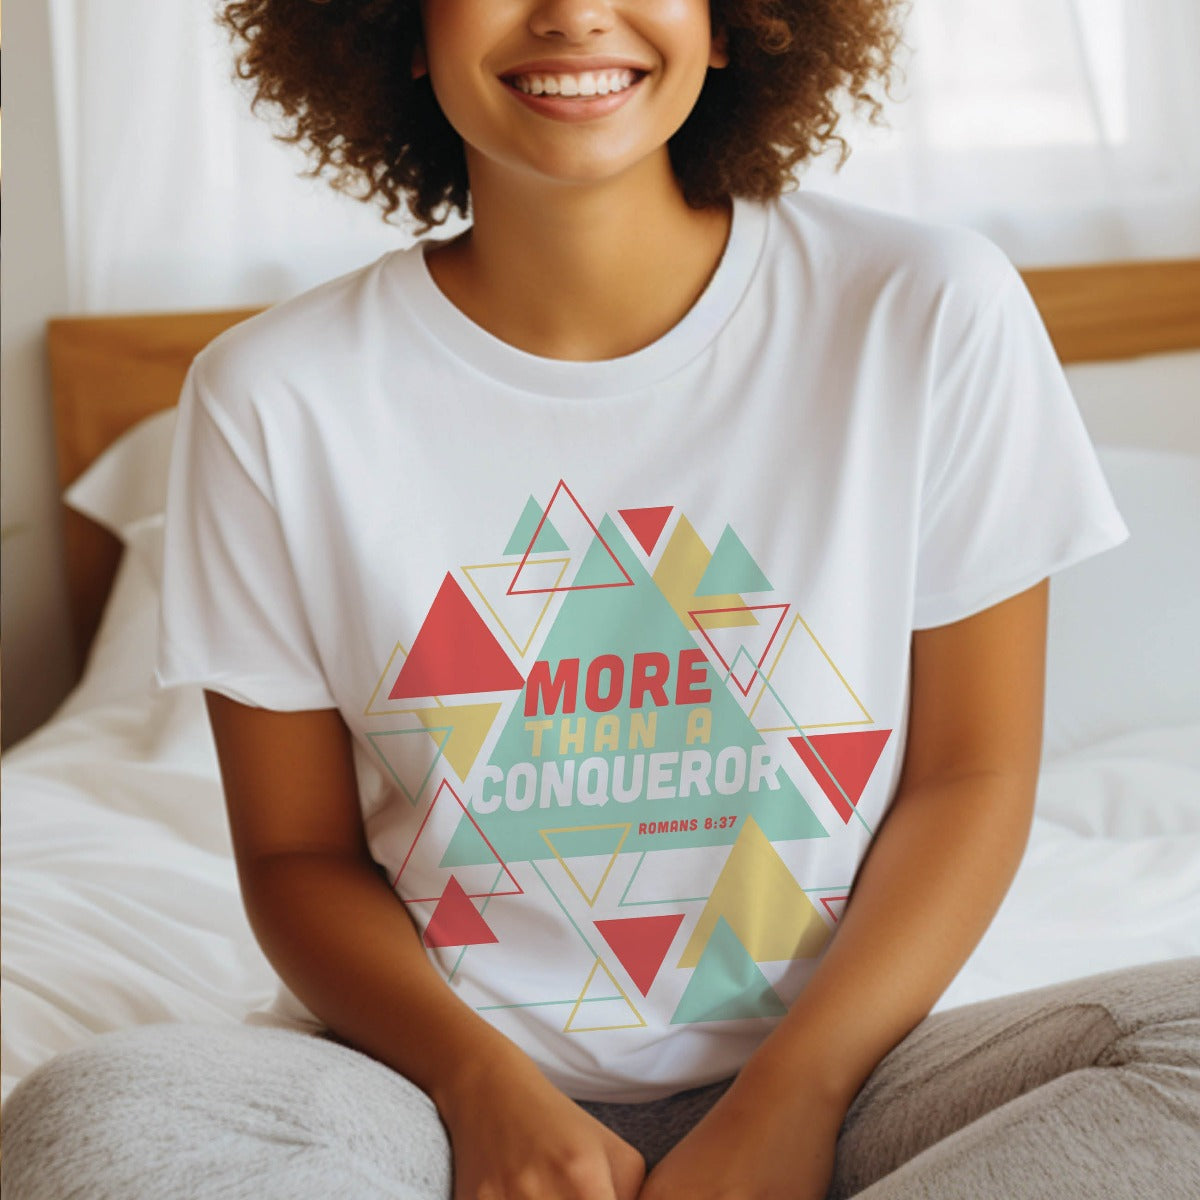 Young woman wearing a white "More Than A Conqueror" Romans 8:37 bible verse scripture unisex faith-based Christian Bella Canvas 3001 t-shirt, with bright and colorful geometric triangles pattern, made in the USA for Men and Women Jesus believers